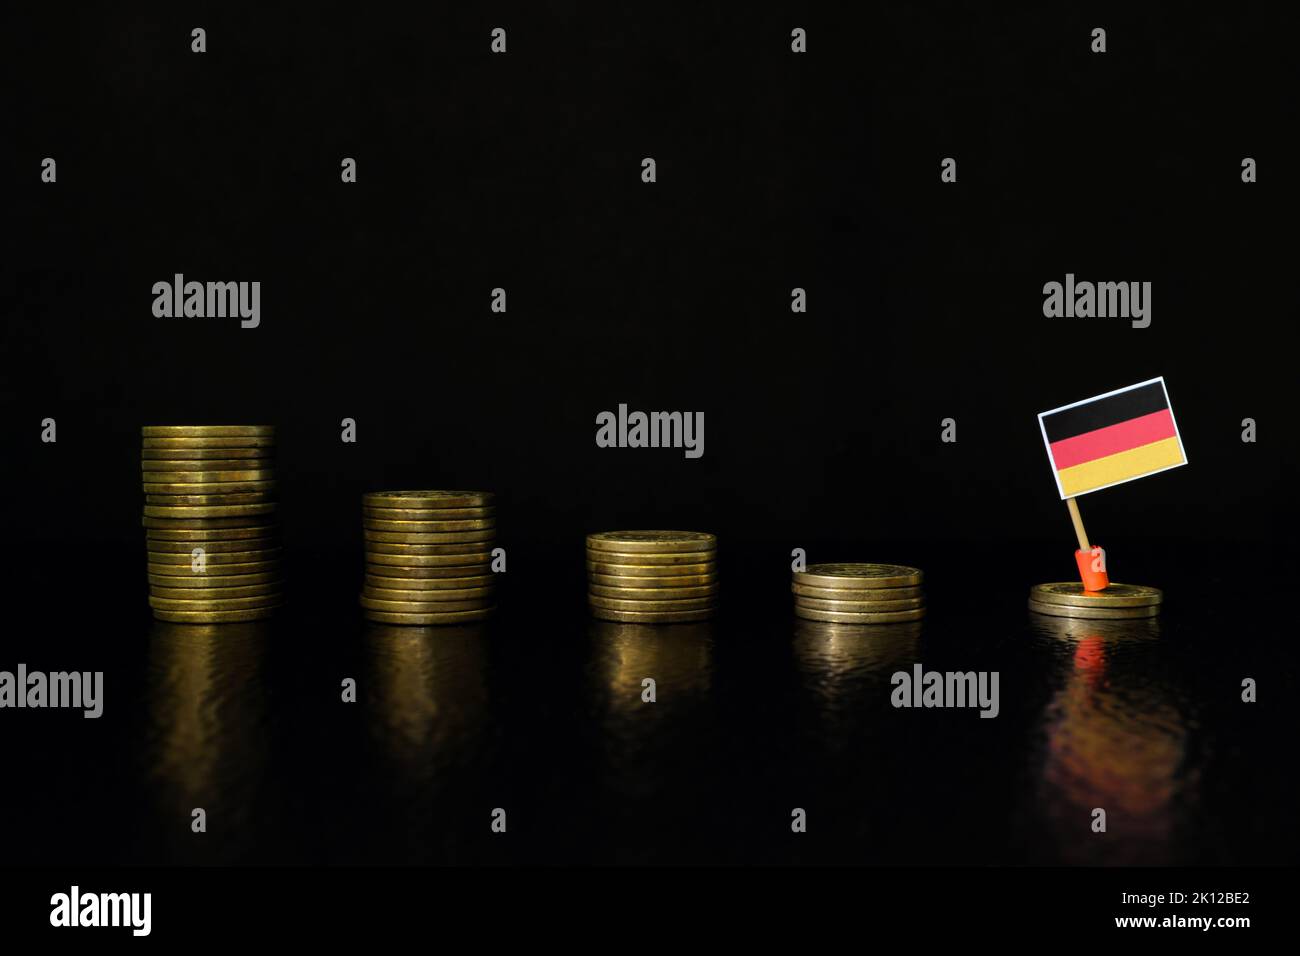 Germany economic recession, financial crisis and currency depreciation concept. German flag in decreasing stack of coins in dark black background. Stock Photo